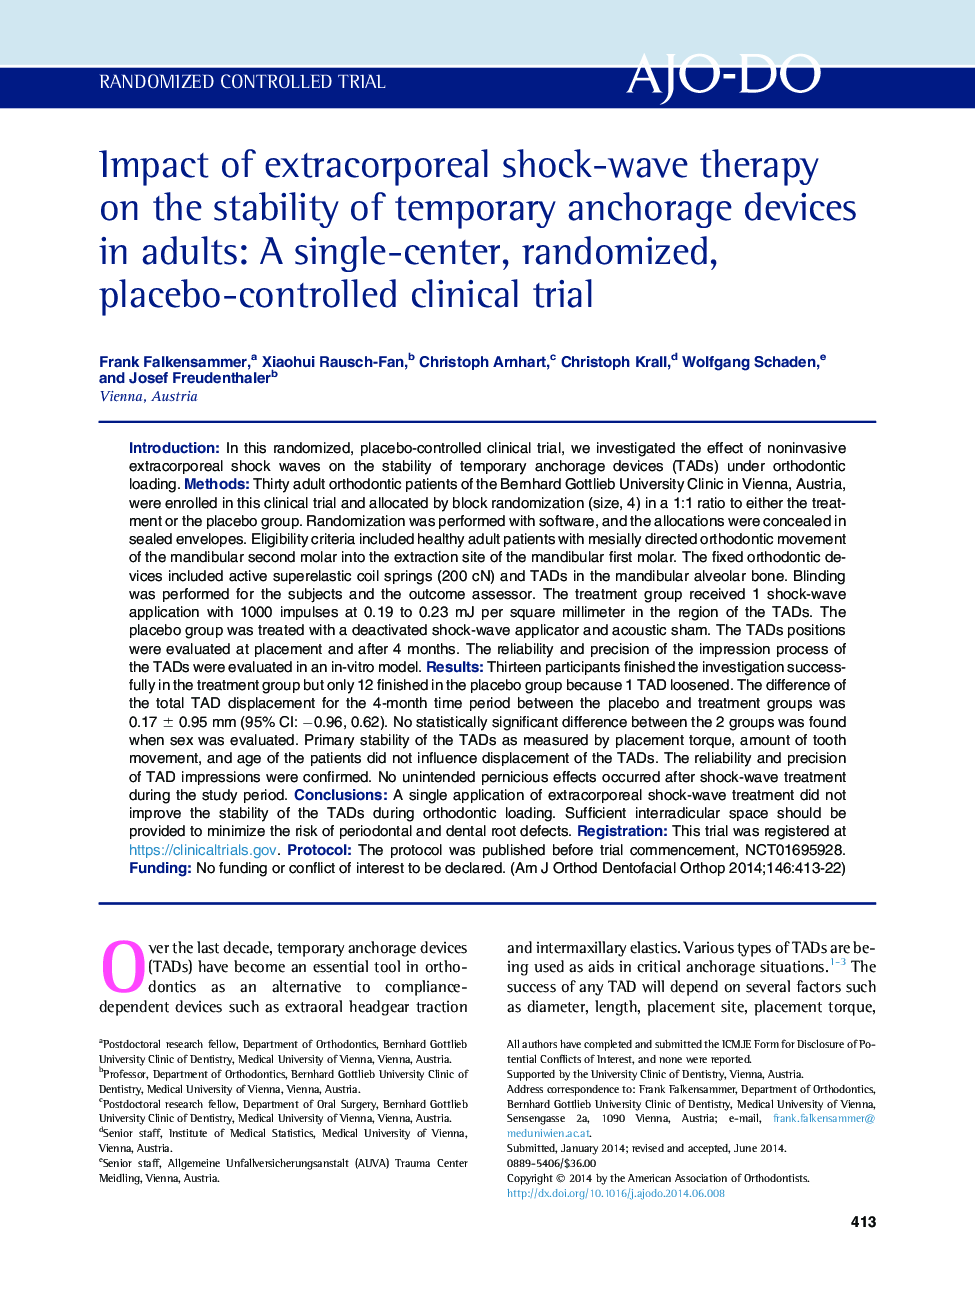 Impact of extracorporeal shock-wave therapy on the stability of temporary anchorage devices in adults: A single-center, randomized, placebo-controlled clinical trial 